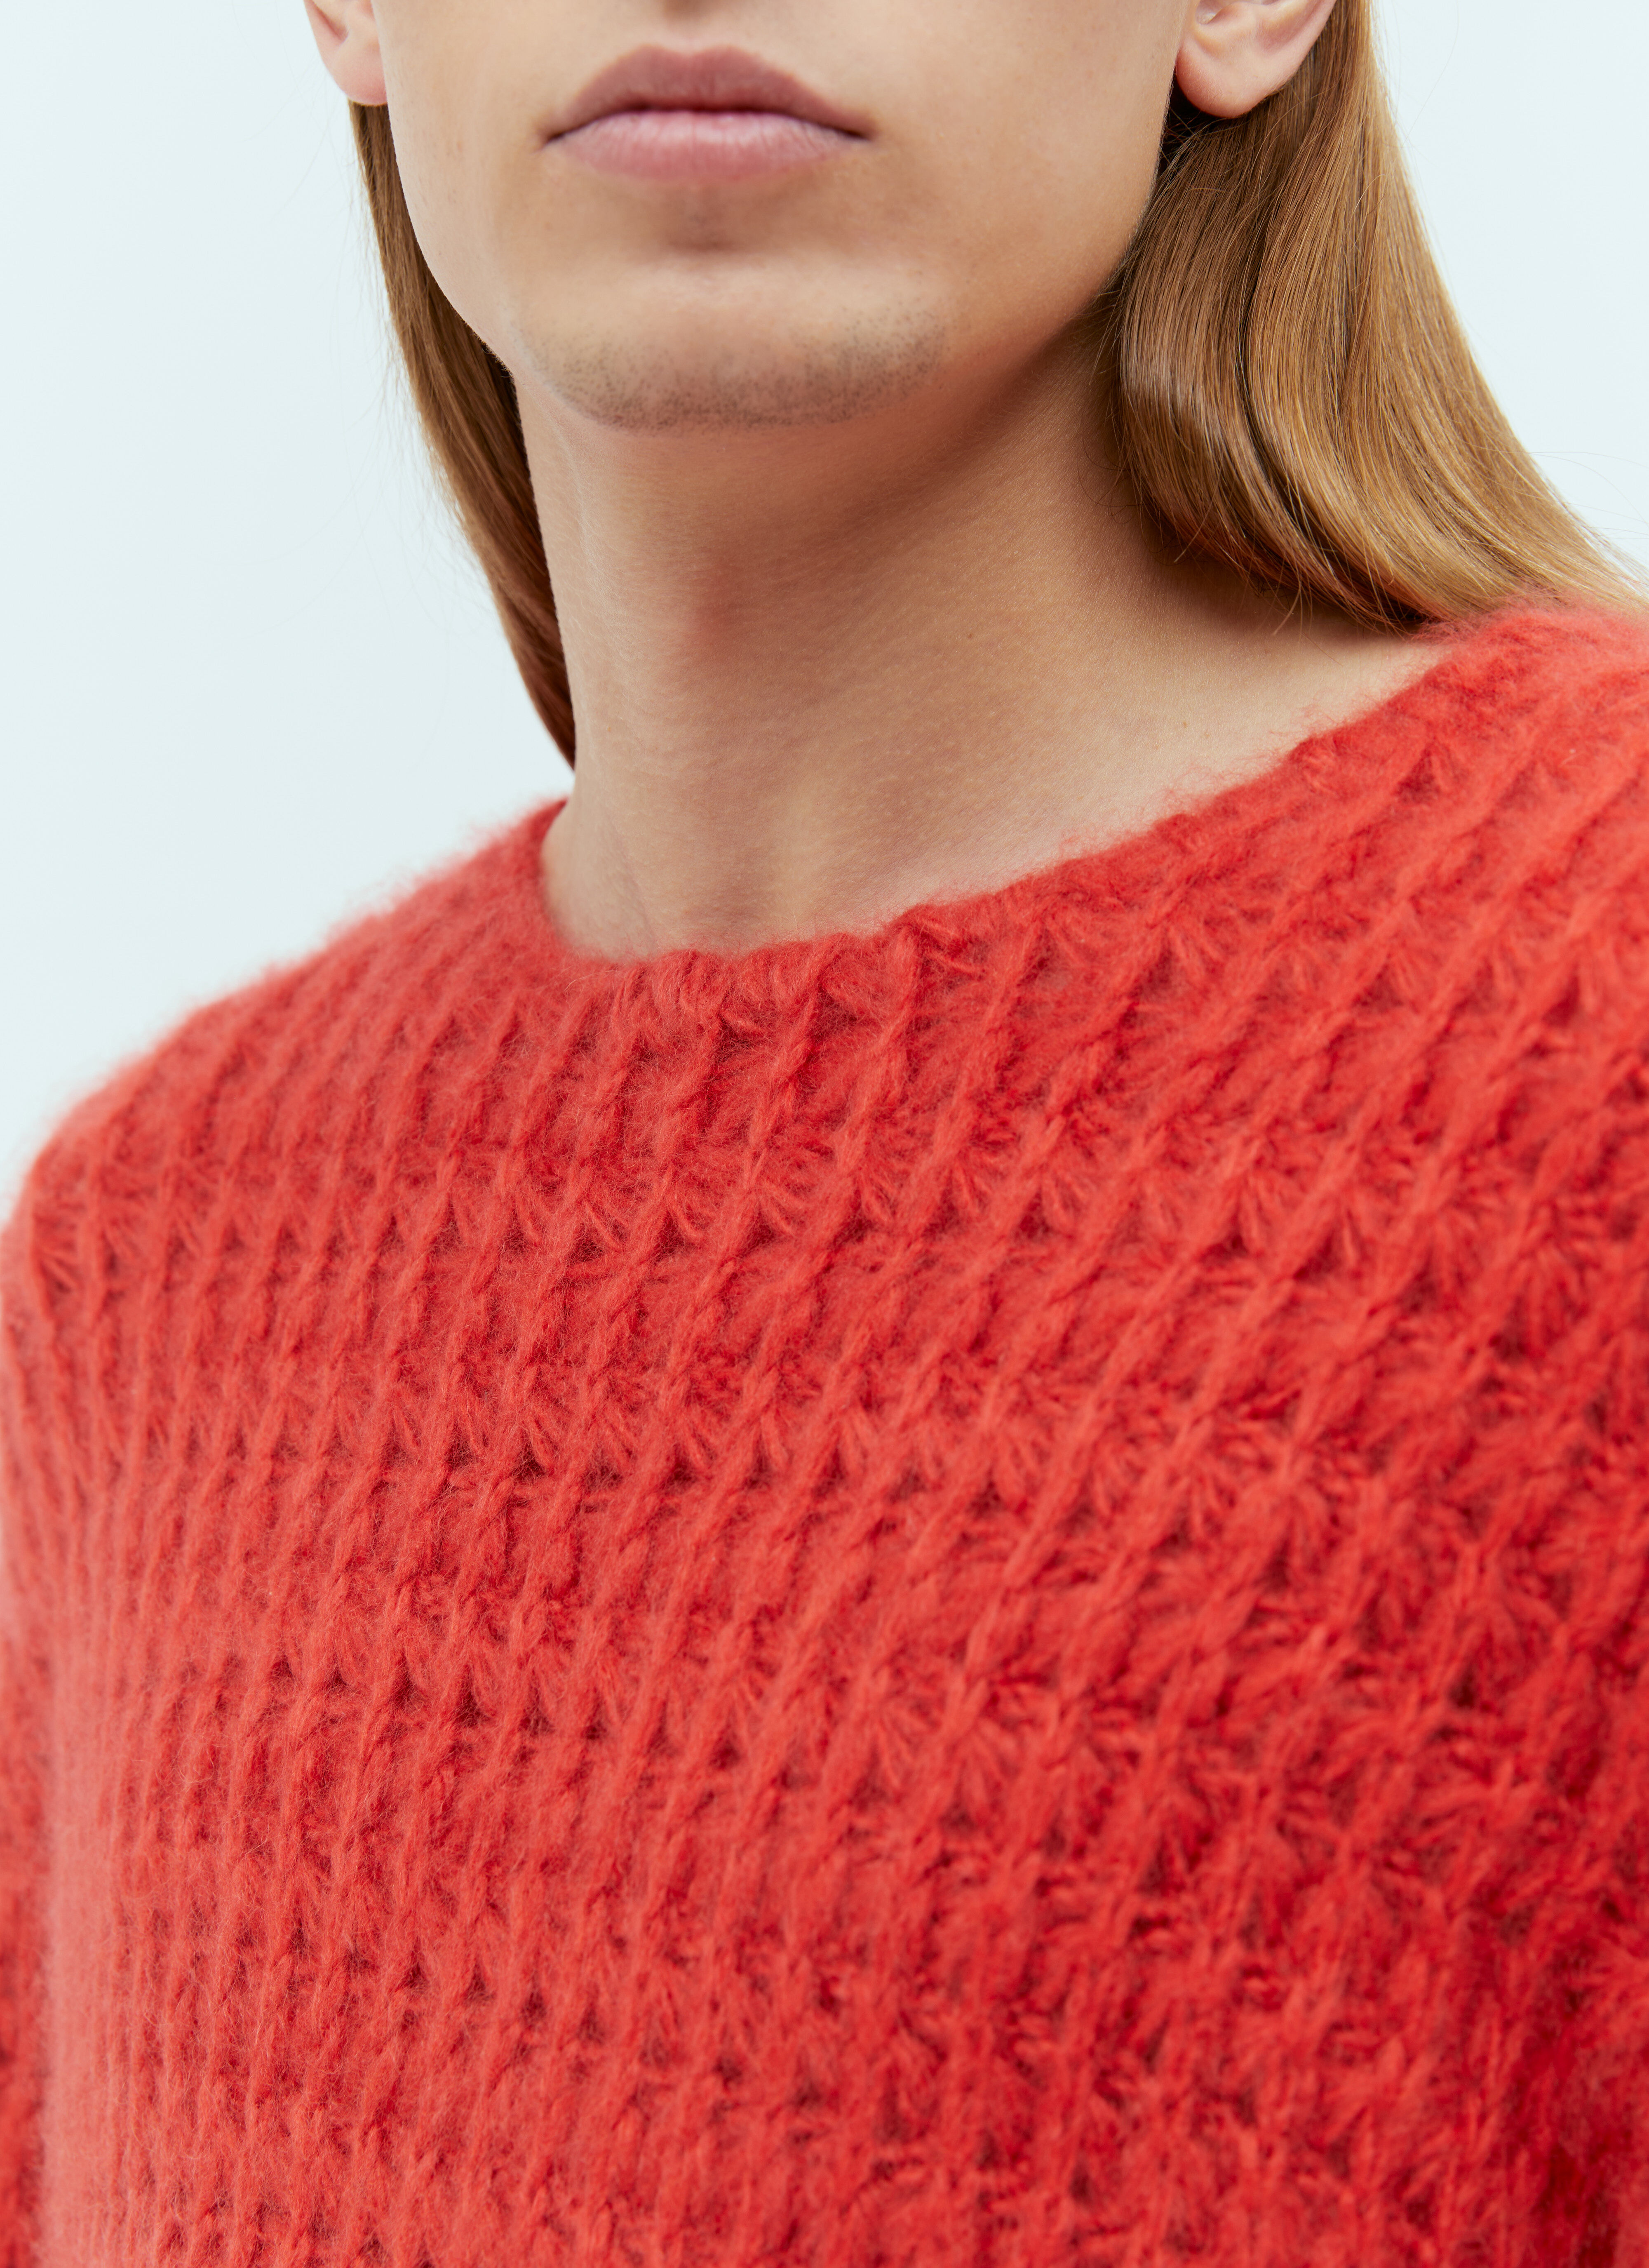 The Row Red Chevro Sweater